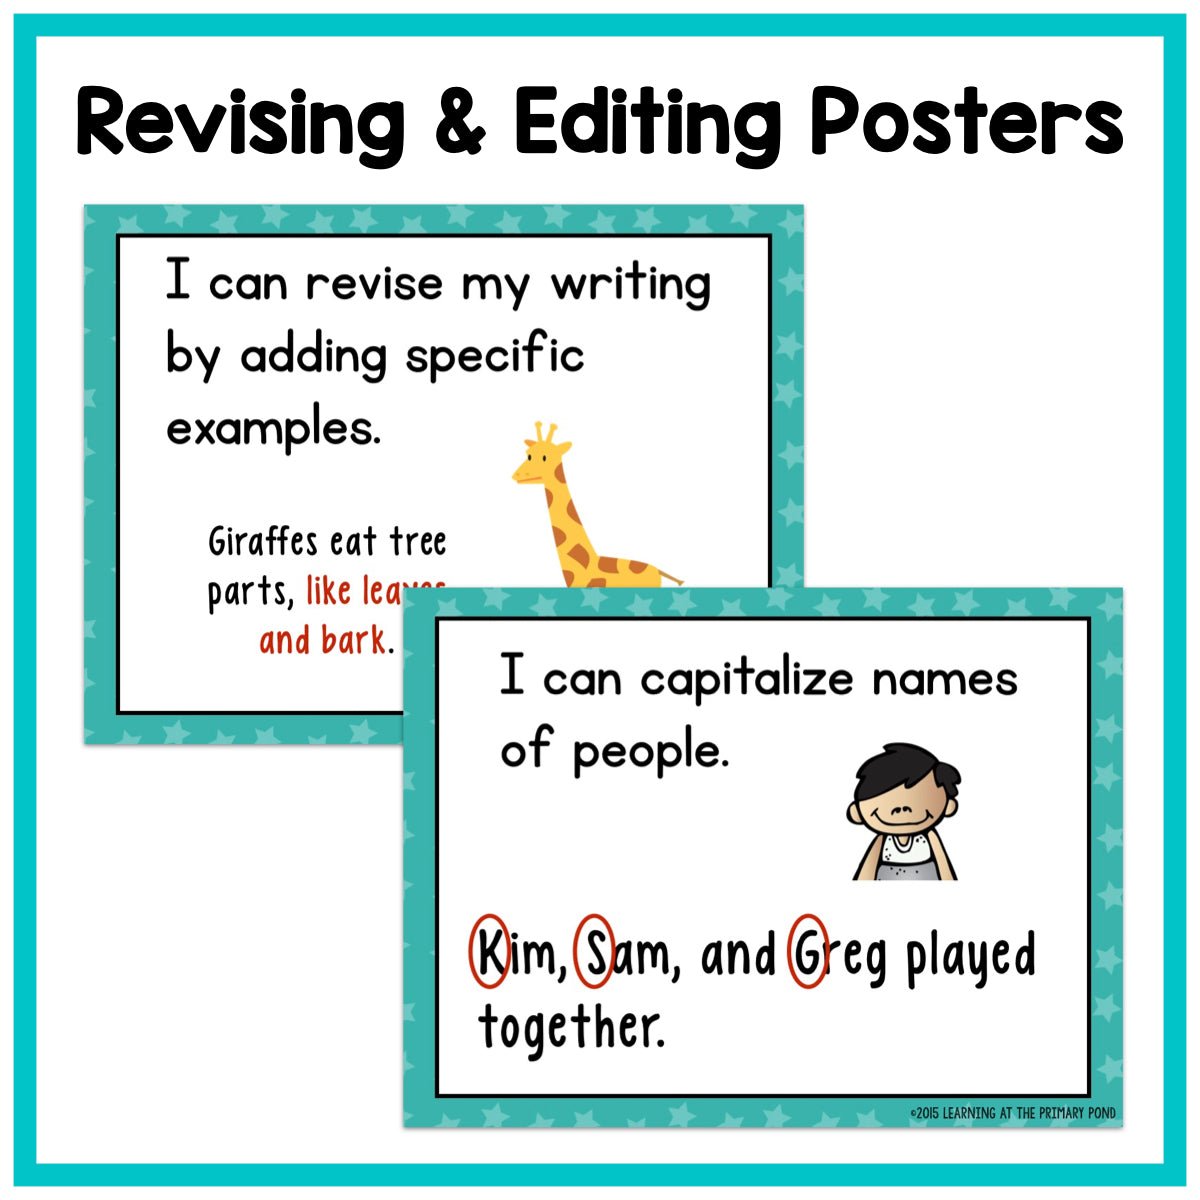 Revising and Editing Toolkit for Kindergarten, First, and Second Grade - learning-at-the-primary-pond